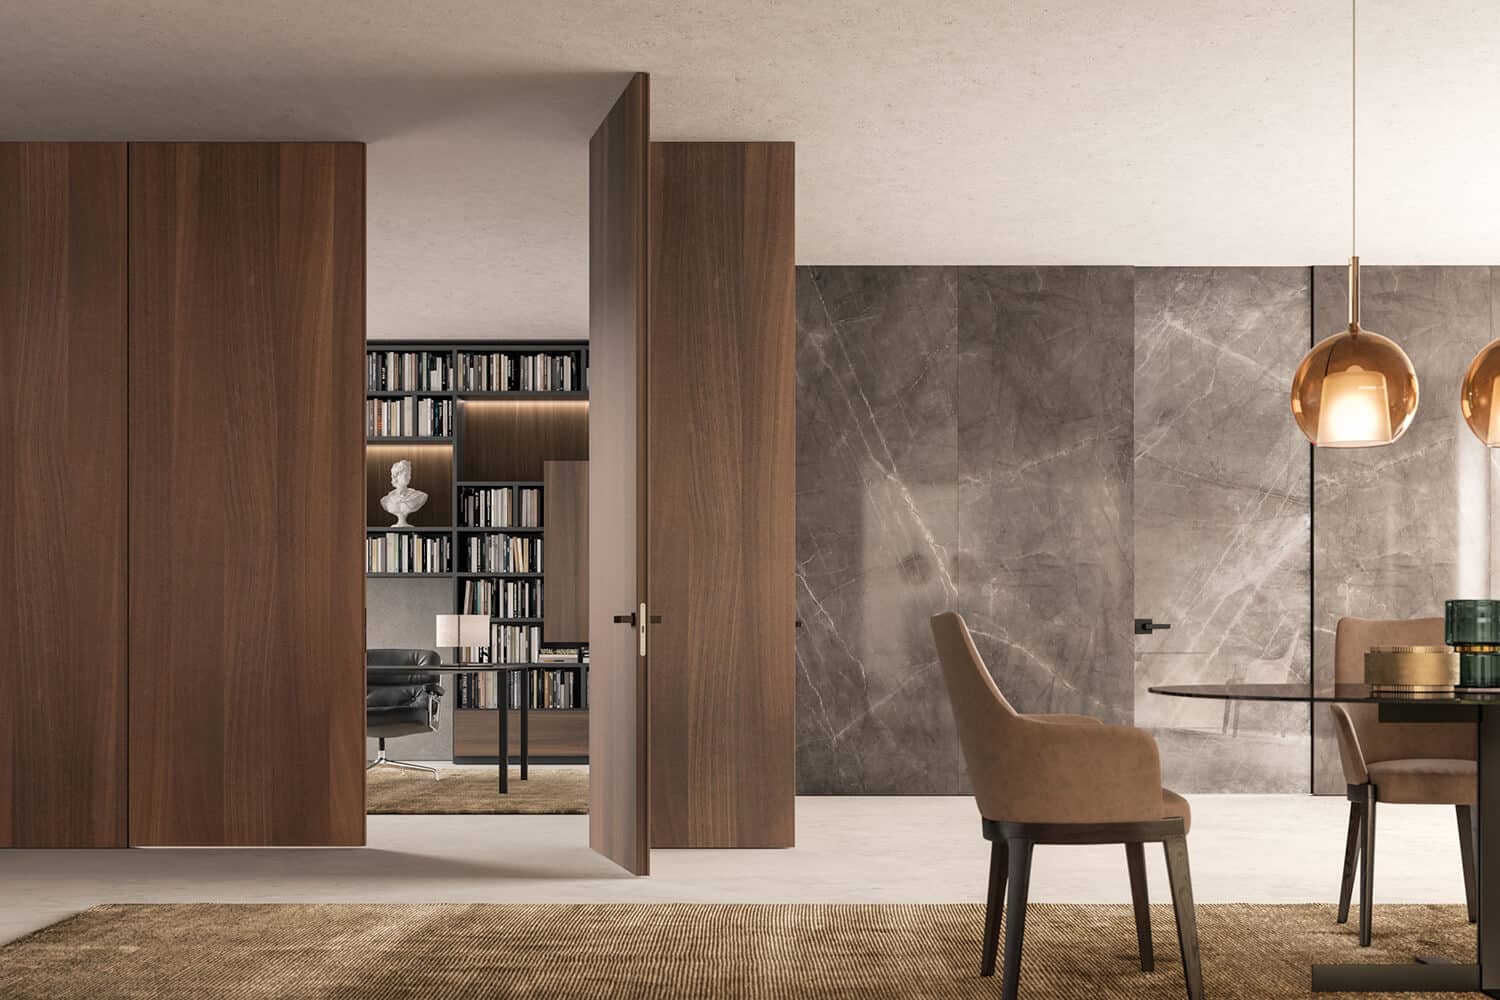 The beauty of the Canaletto walnut doors complements the interiors and elevates the aesthetic quality of the space.